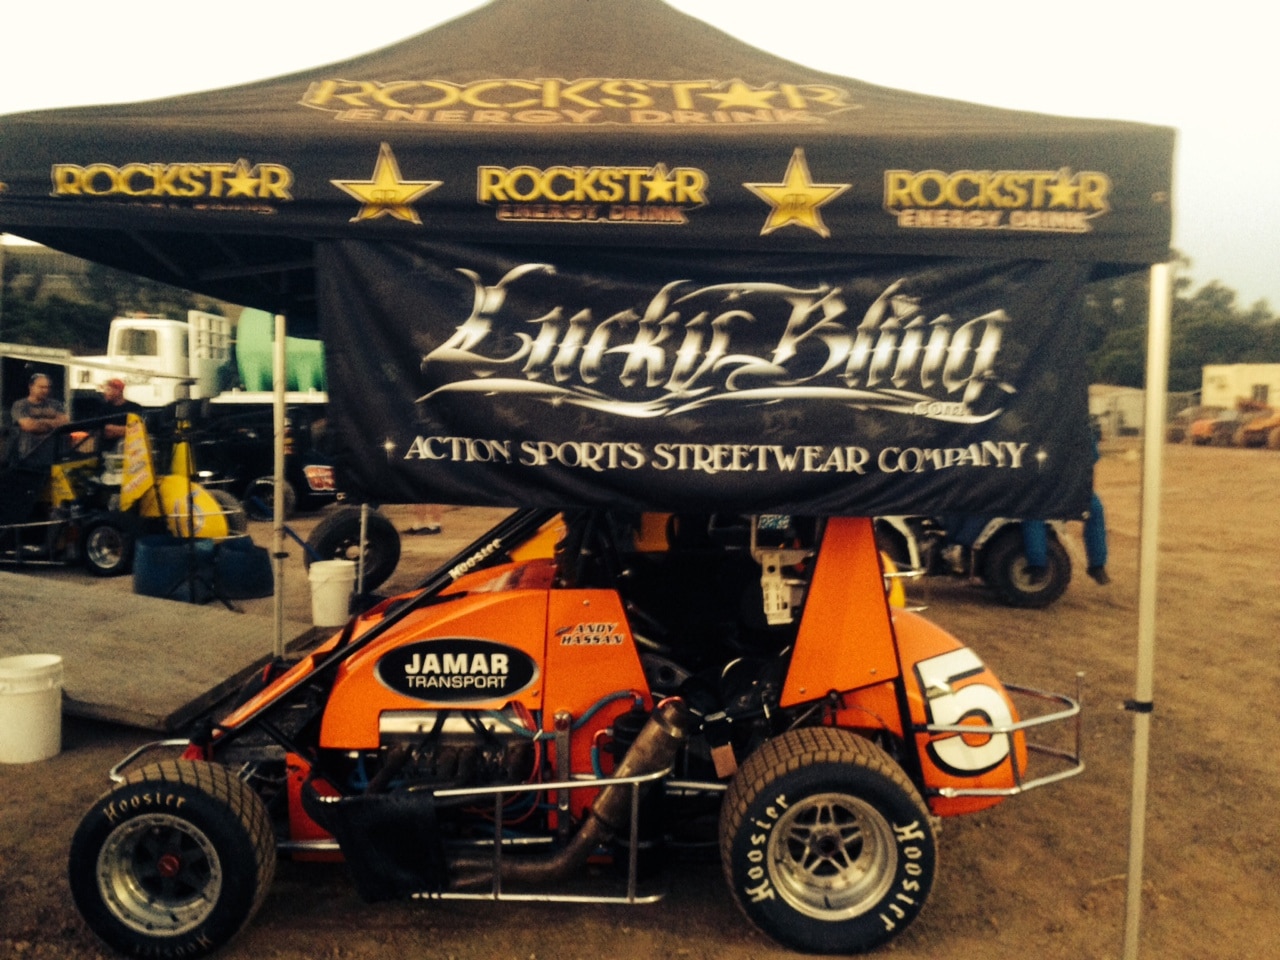 Andy Hassan Racing Sponsor Lucky Bling